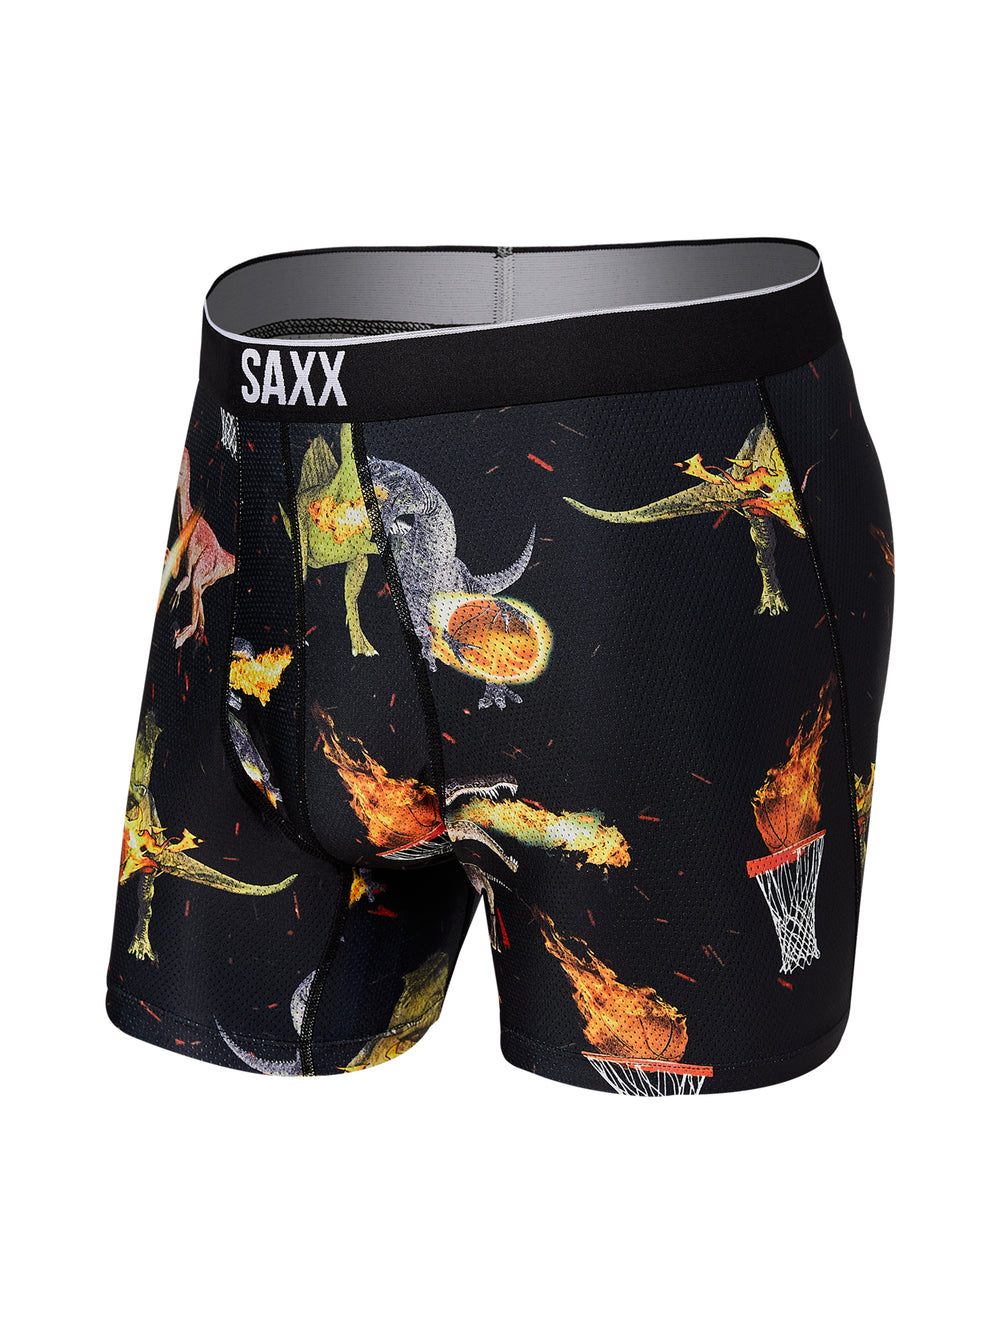 SAXX VOLT BOXER BRIEFING - OG BALLERS - CLEARANCE